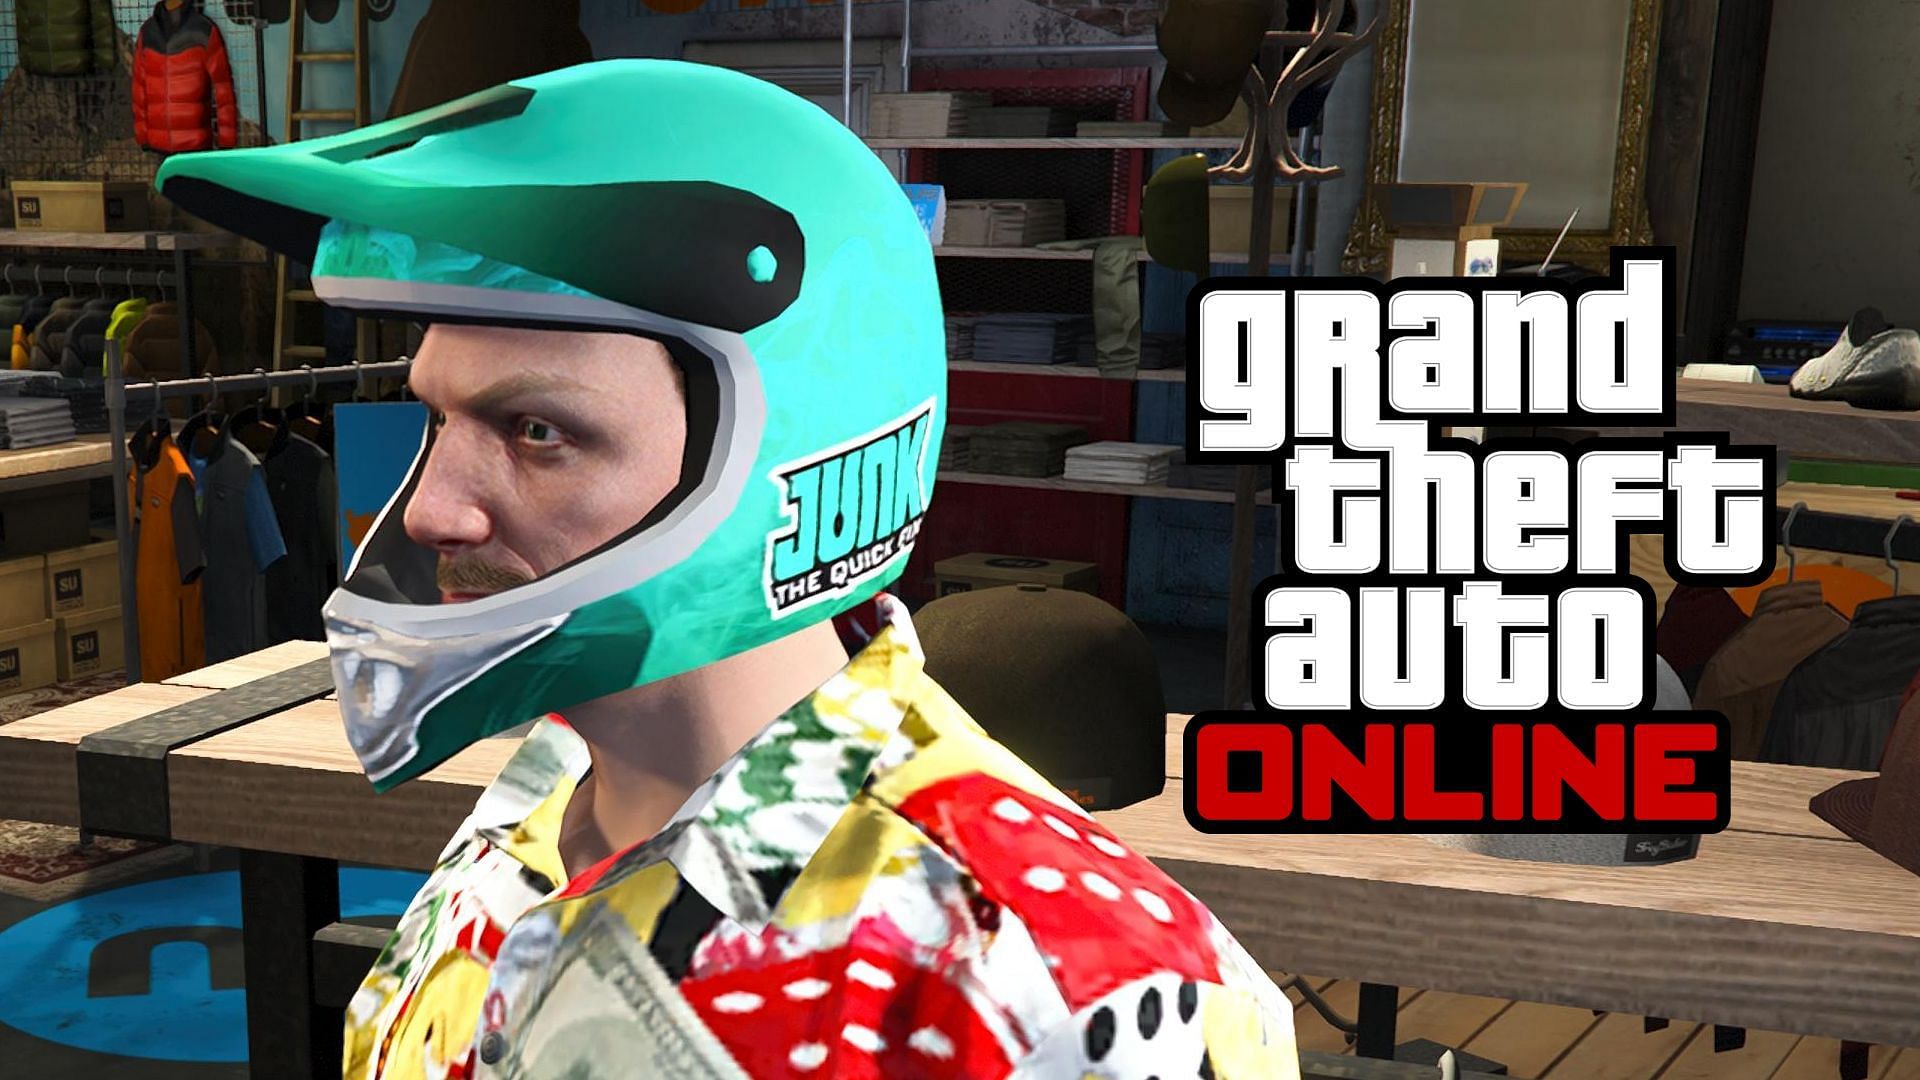 Where to buy motorcycle helmets in GTA Online Locations, perks, and more